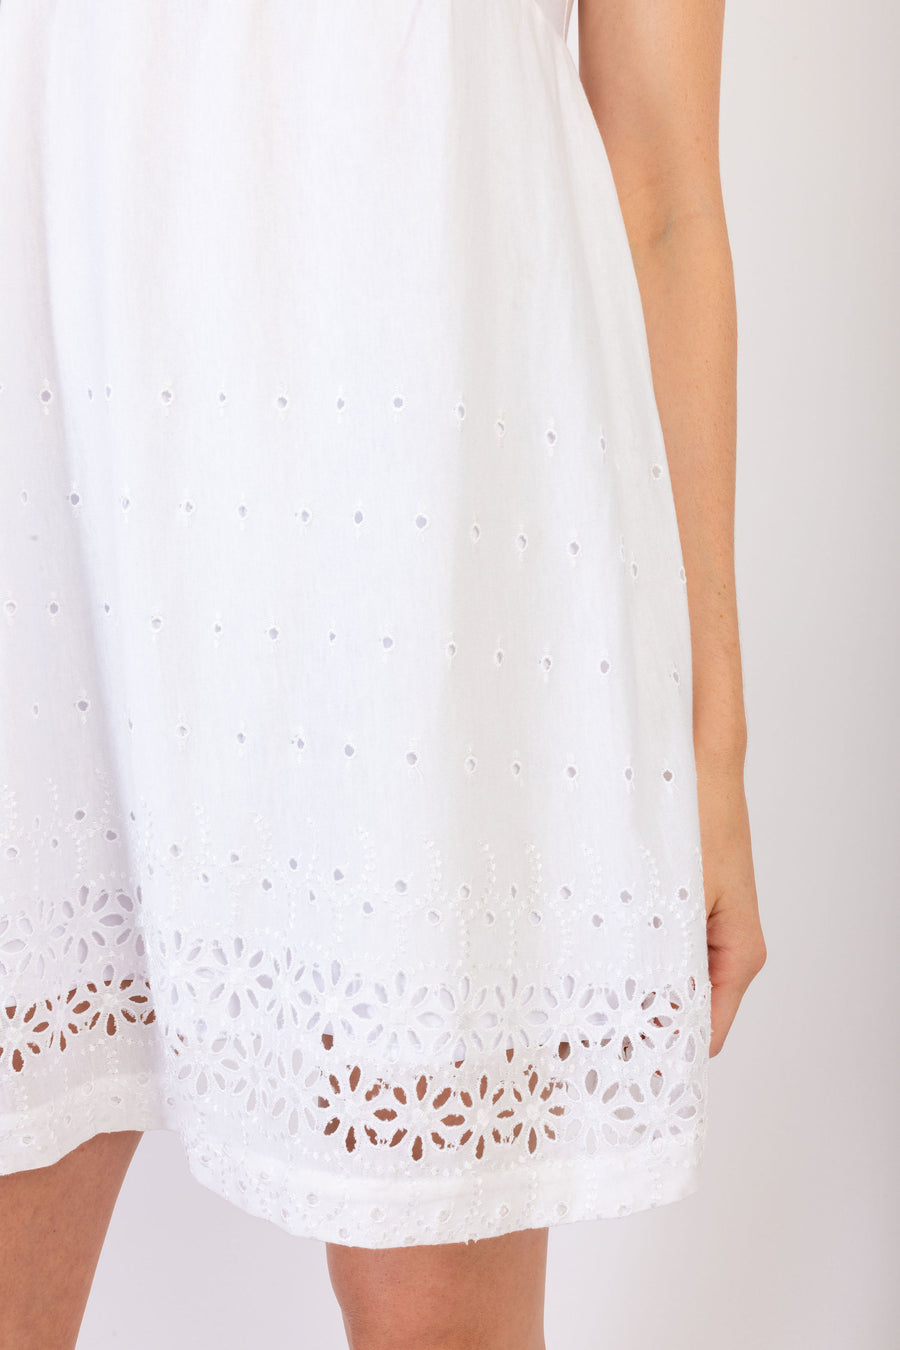 Alexis Dress White Eyelet *Limited*Edition*